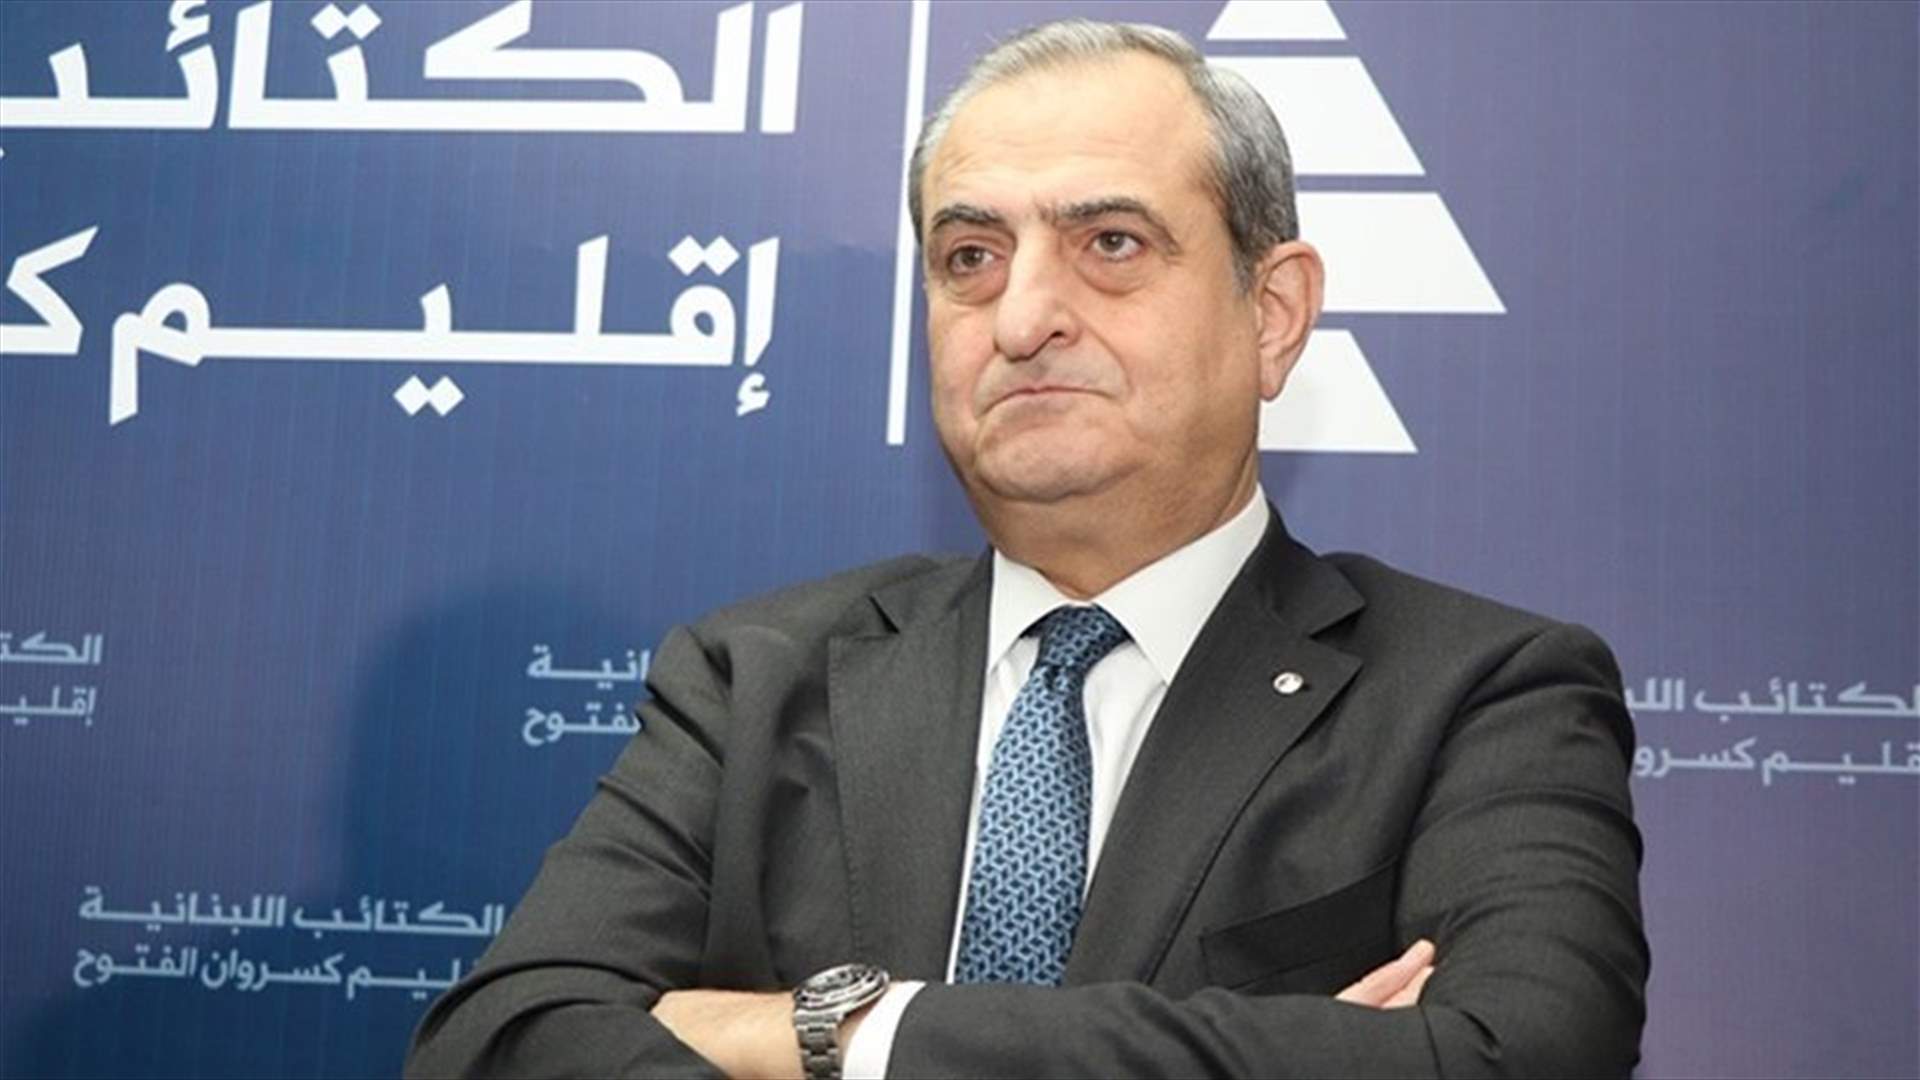 Kataeb Secretary General succumbs to his wounds after explosion